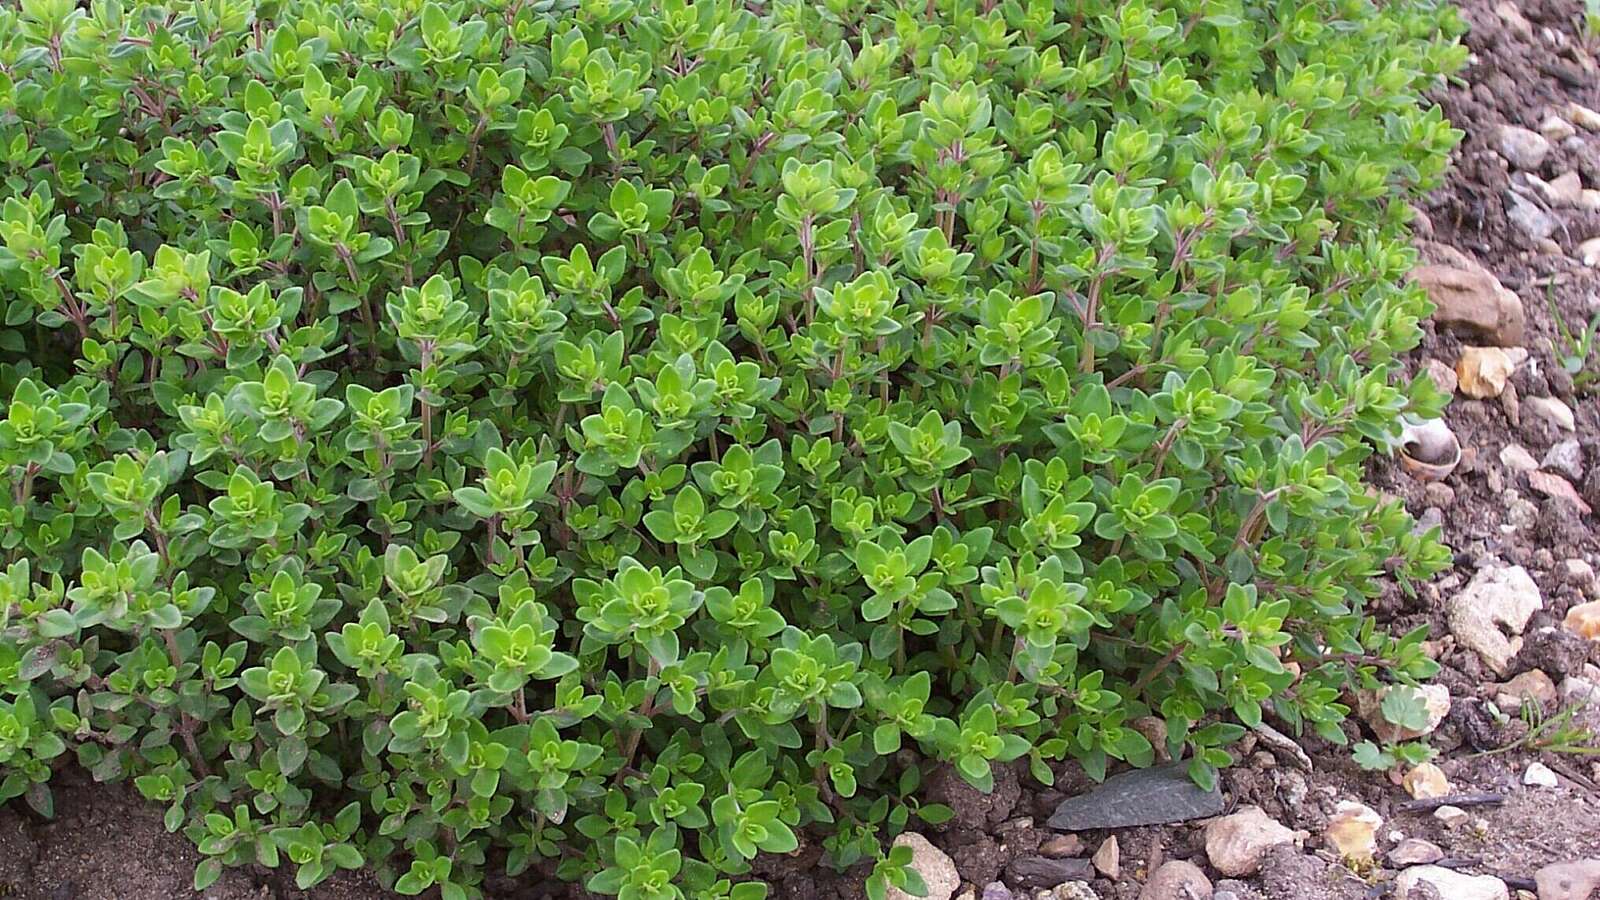 Thyme bush surrounded by gravel